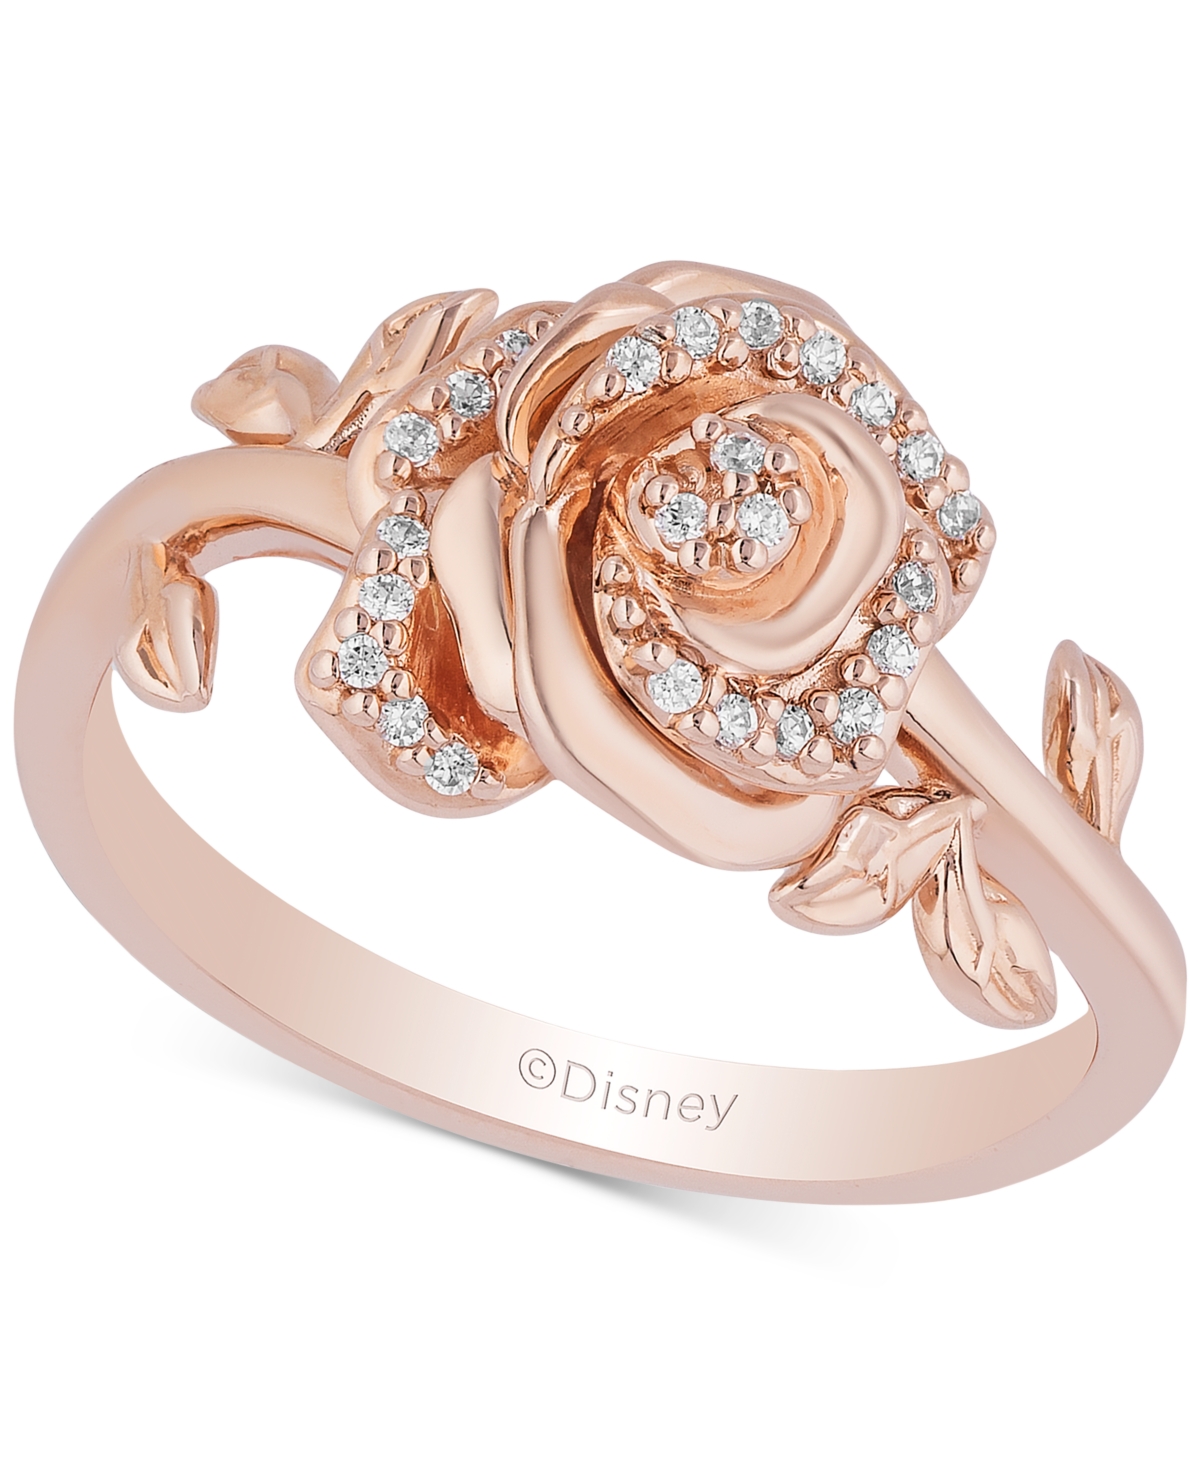 Enchanted Fine Jewelry Enchanted Disney Diamond Rose Belle Ring (1/10 ct. in 14k Gold Reviews - Rings - Jewelry & Watches - Macy's